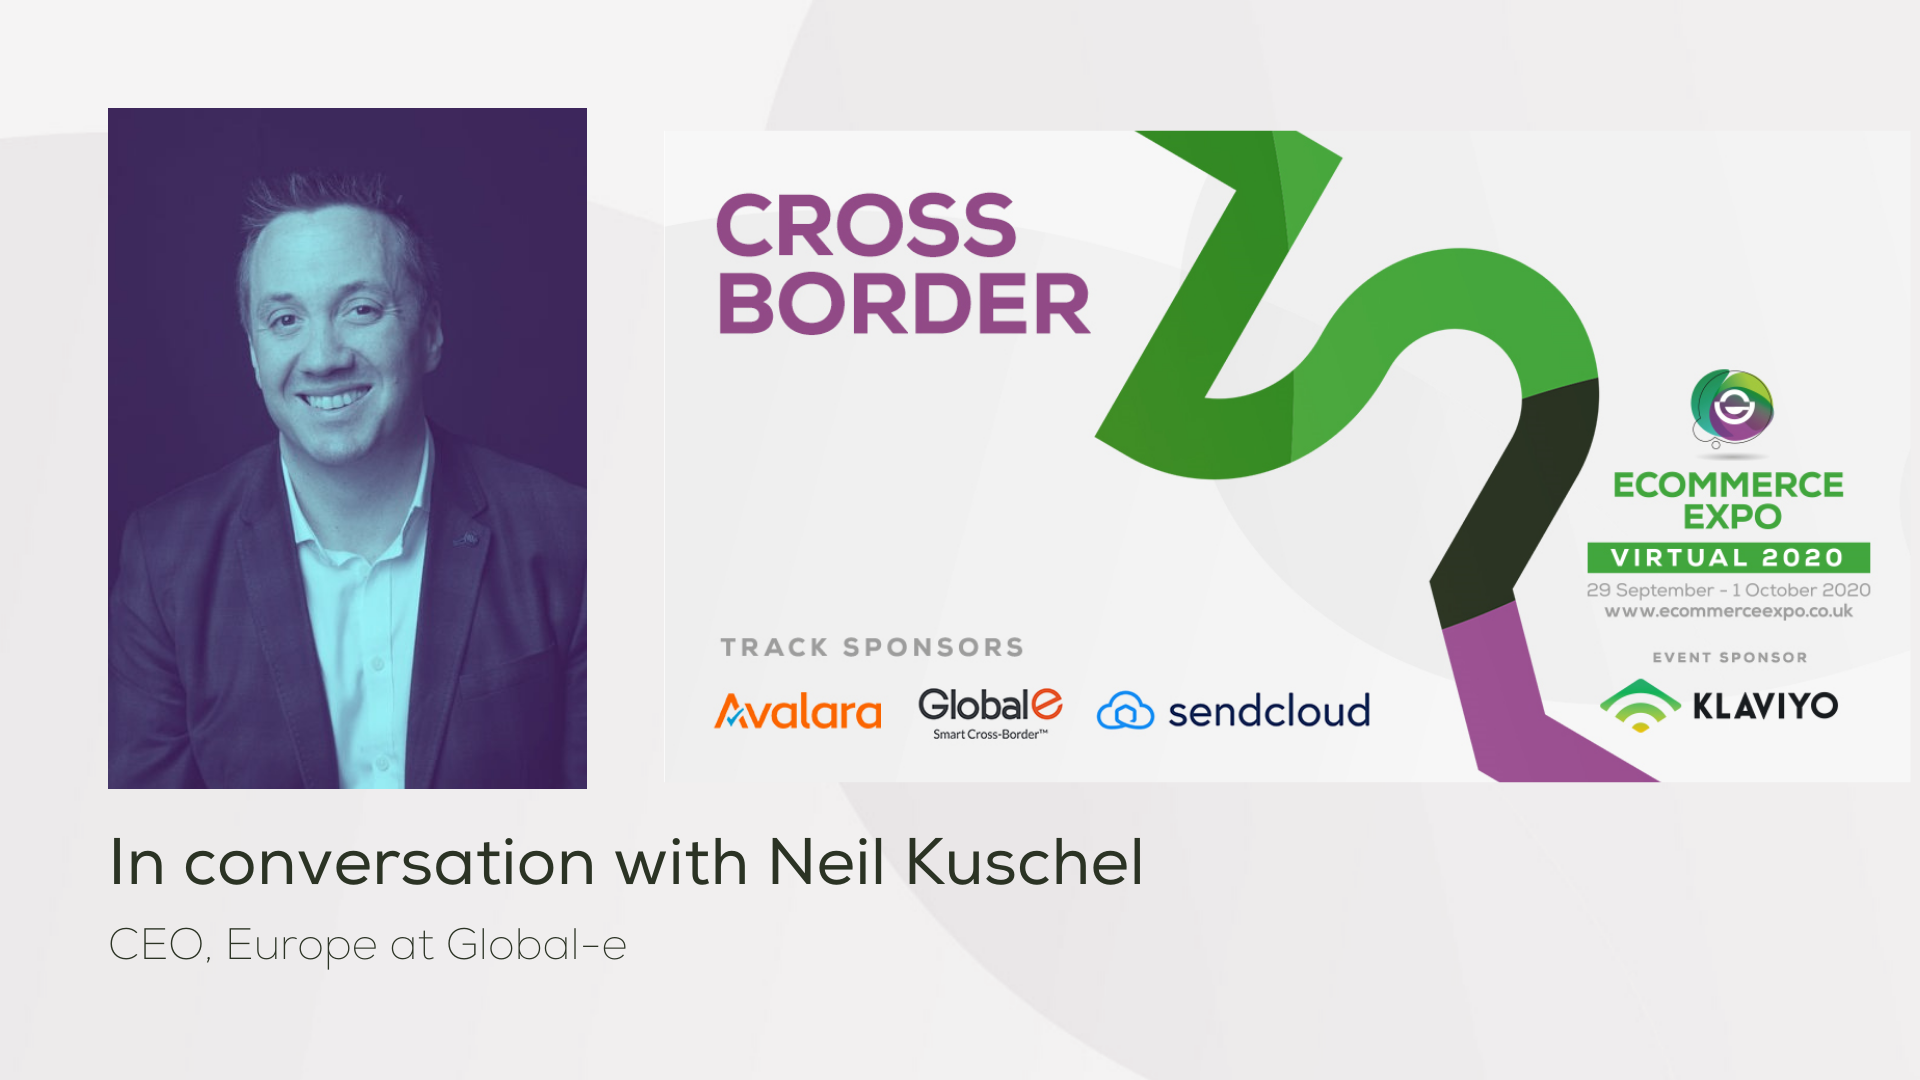 What's been the impact of COVID-19 on cross-border ecommerce? Video interview with Neil Kuschel, CEO, Global-e